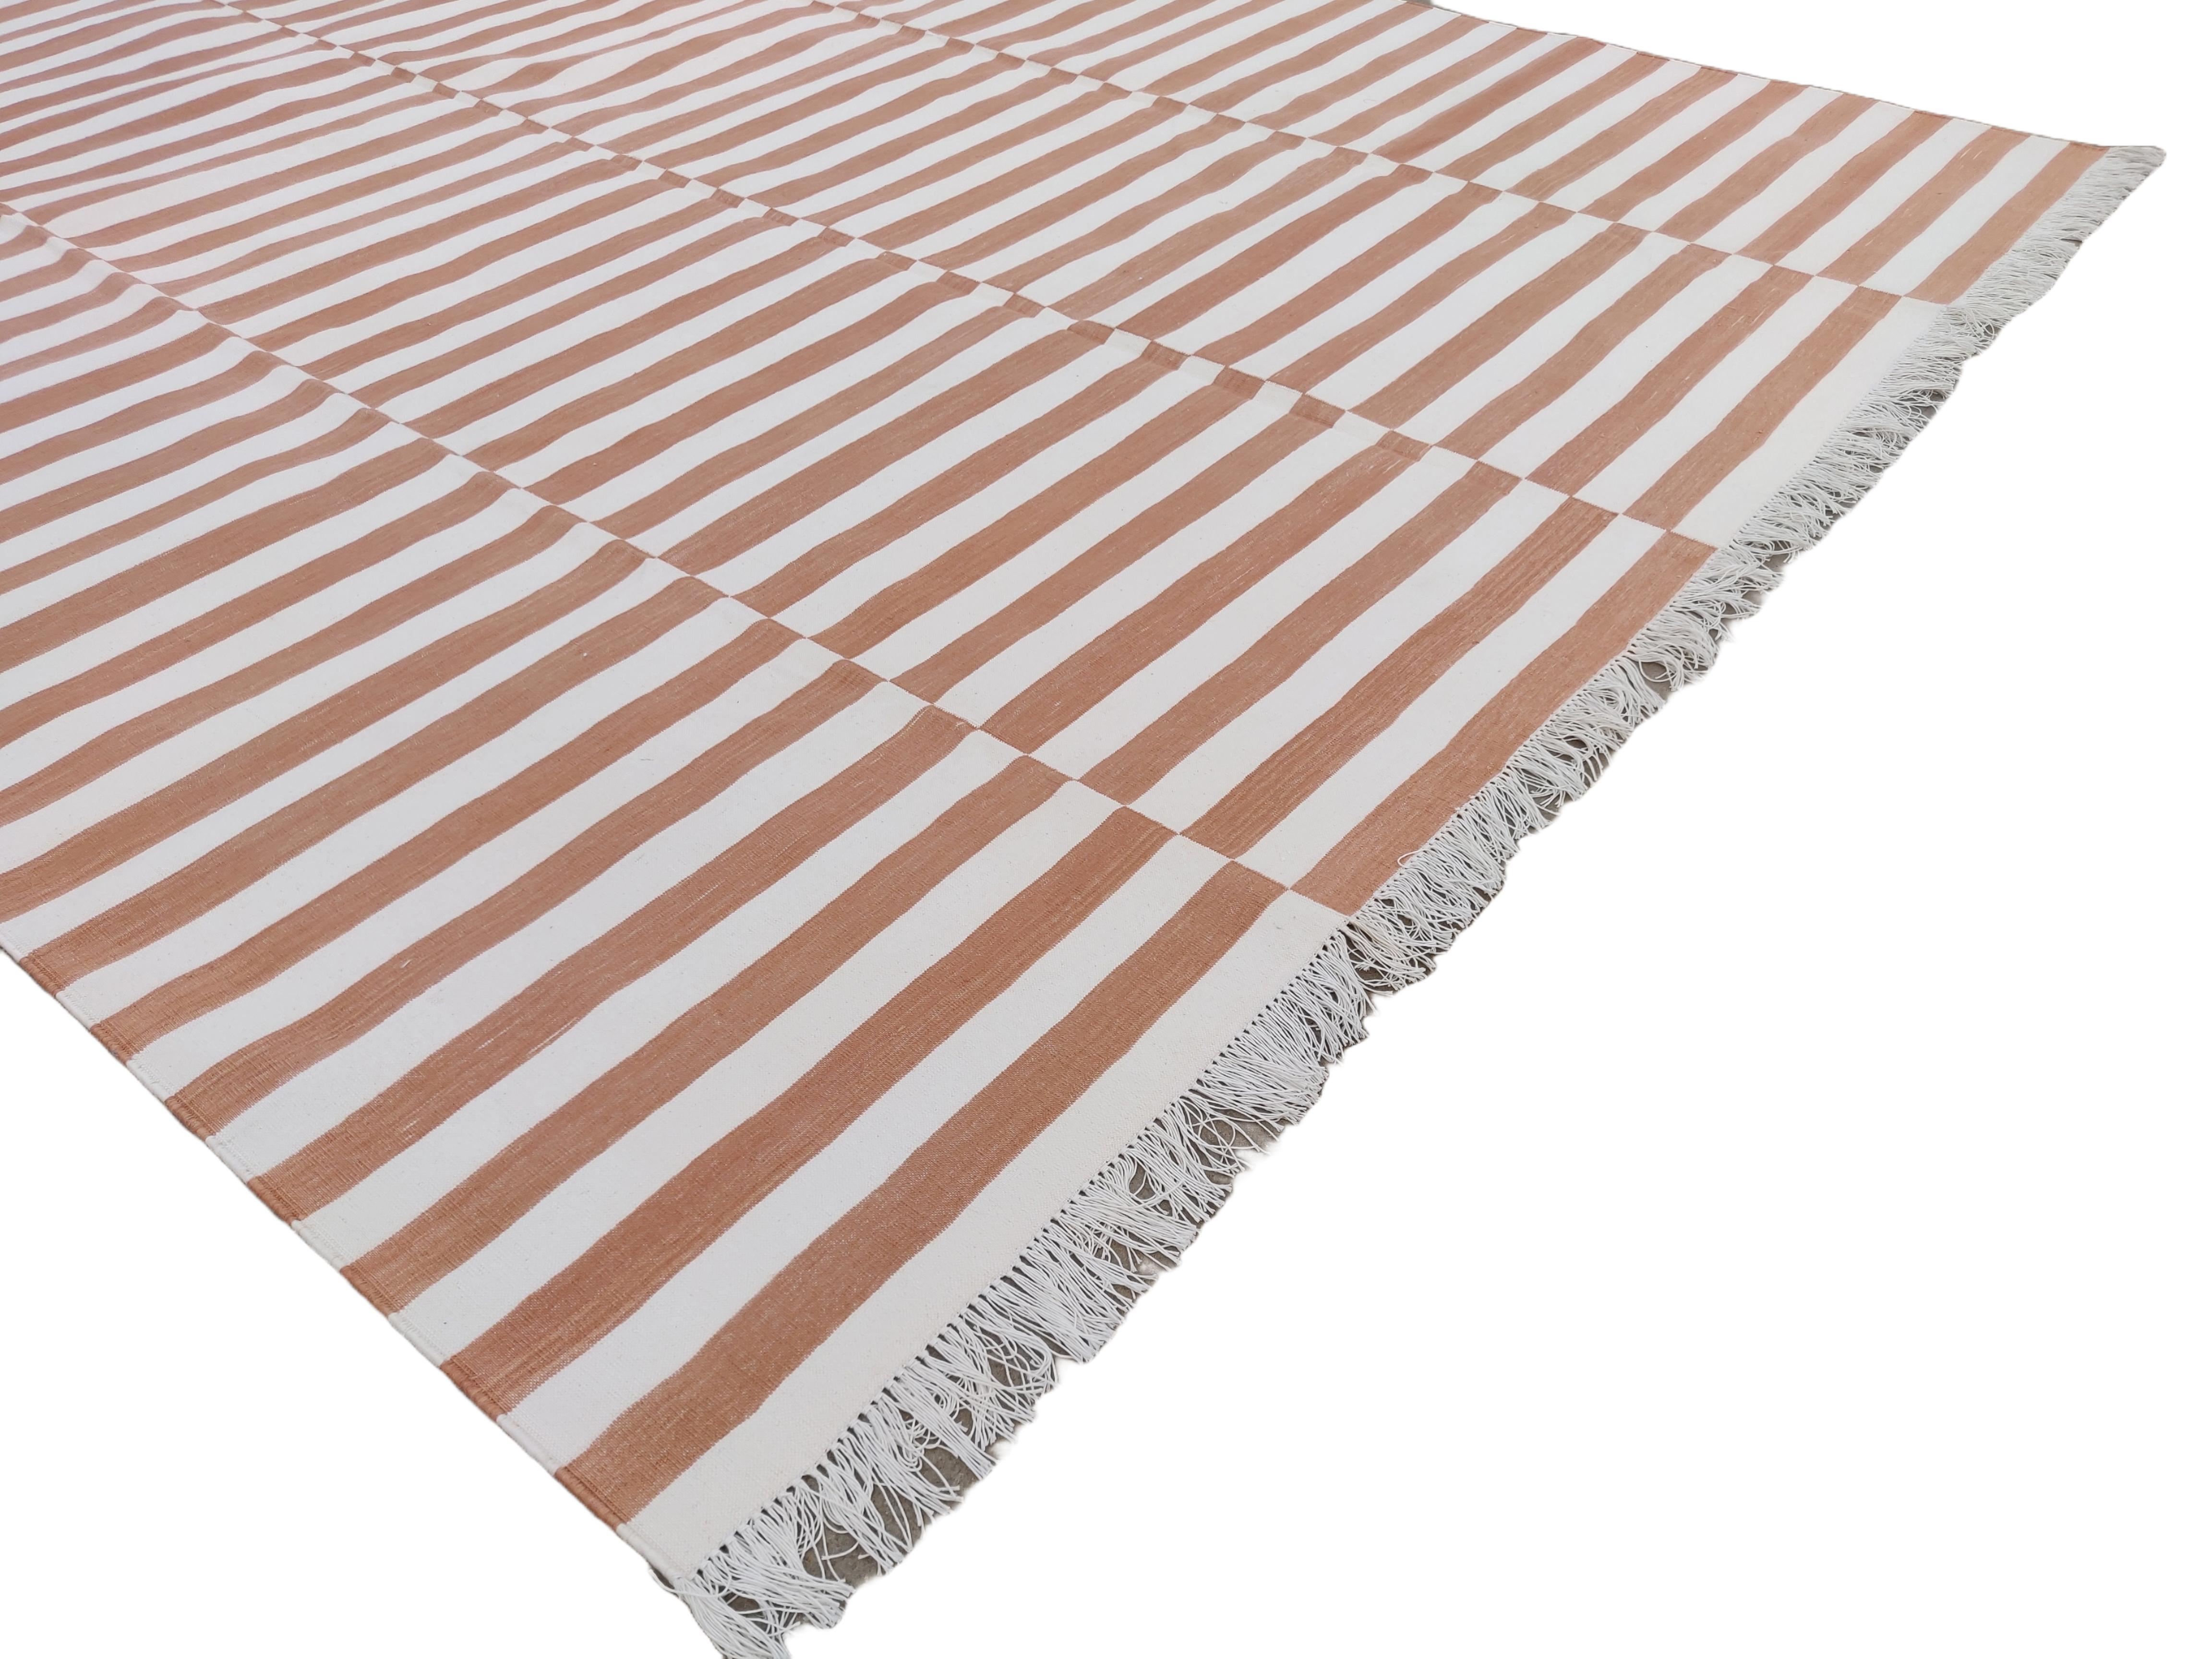 Hand-Woven Handmade Cotton Area Flat Weave Rug, Tan & White Up down Striped Indian Dhurrie For Sale